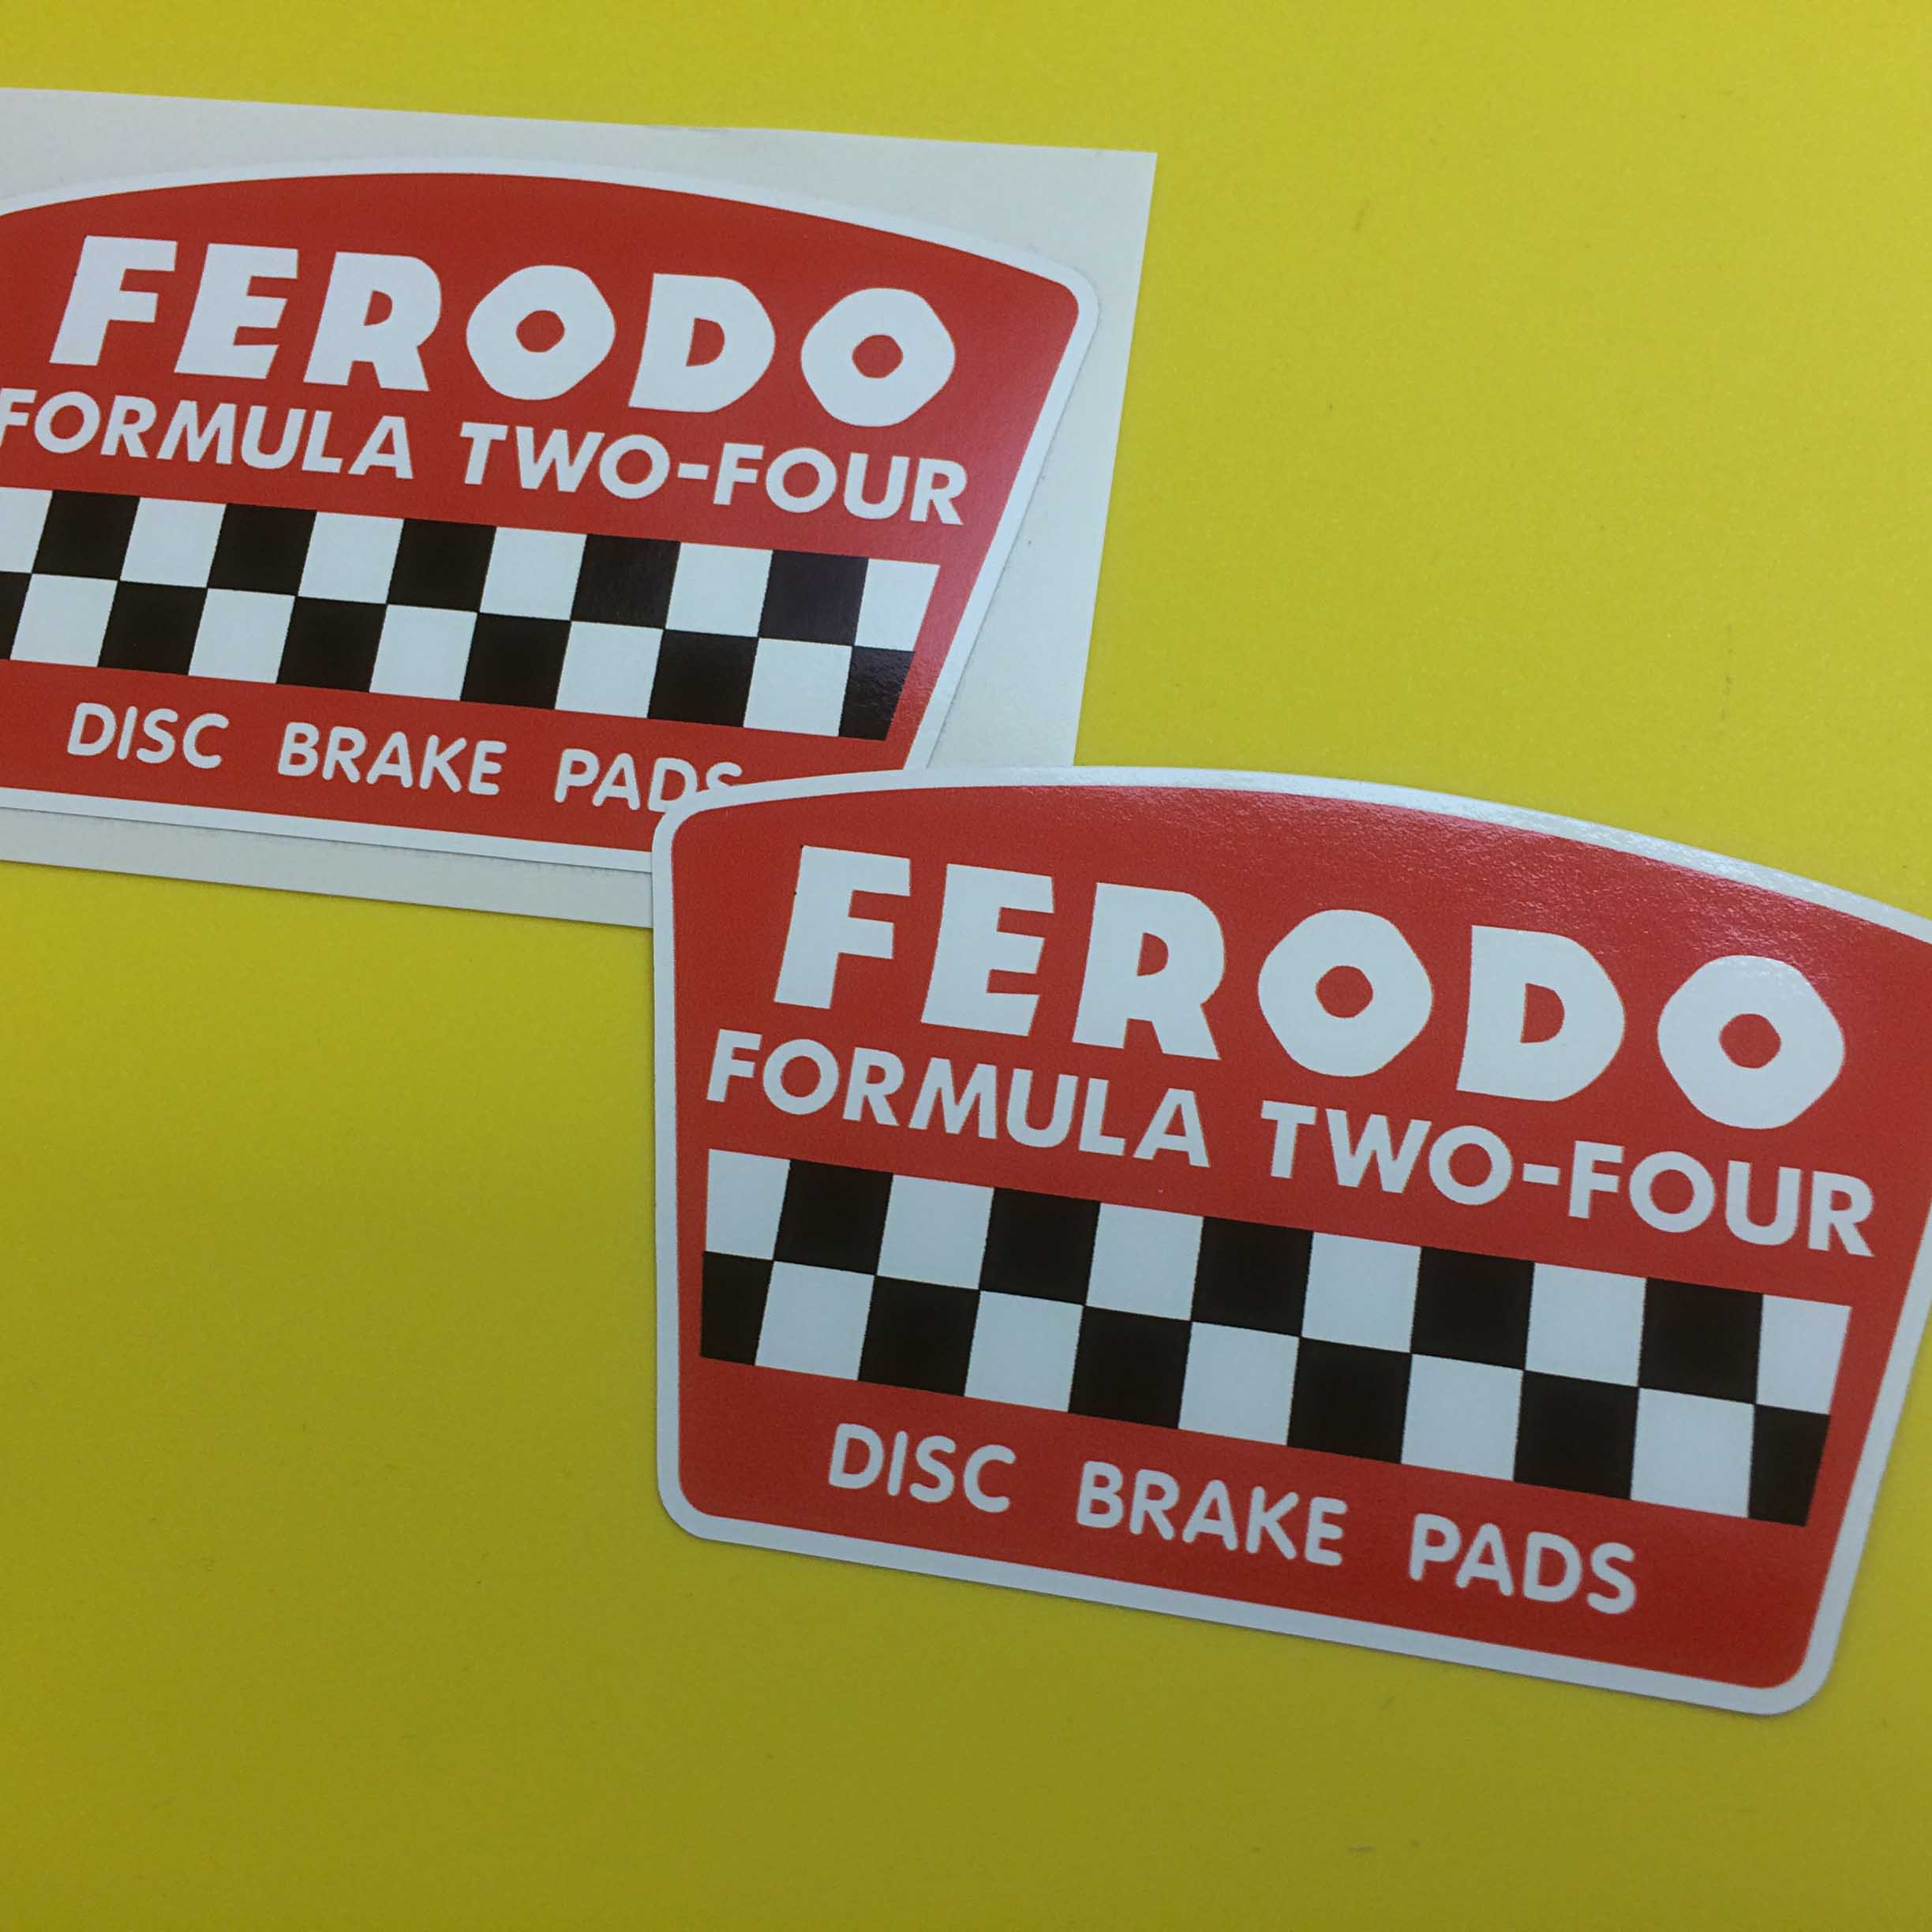 Ferodo Formula Two-Four Disc Brake Pads in white lettering and a strip of black and white chequer on a red sticker.